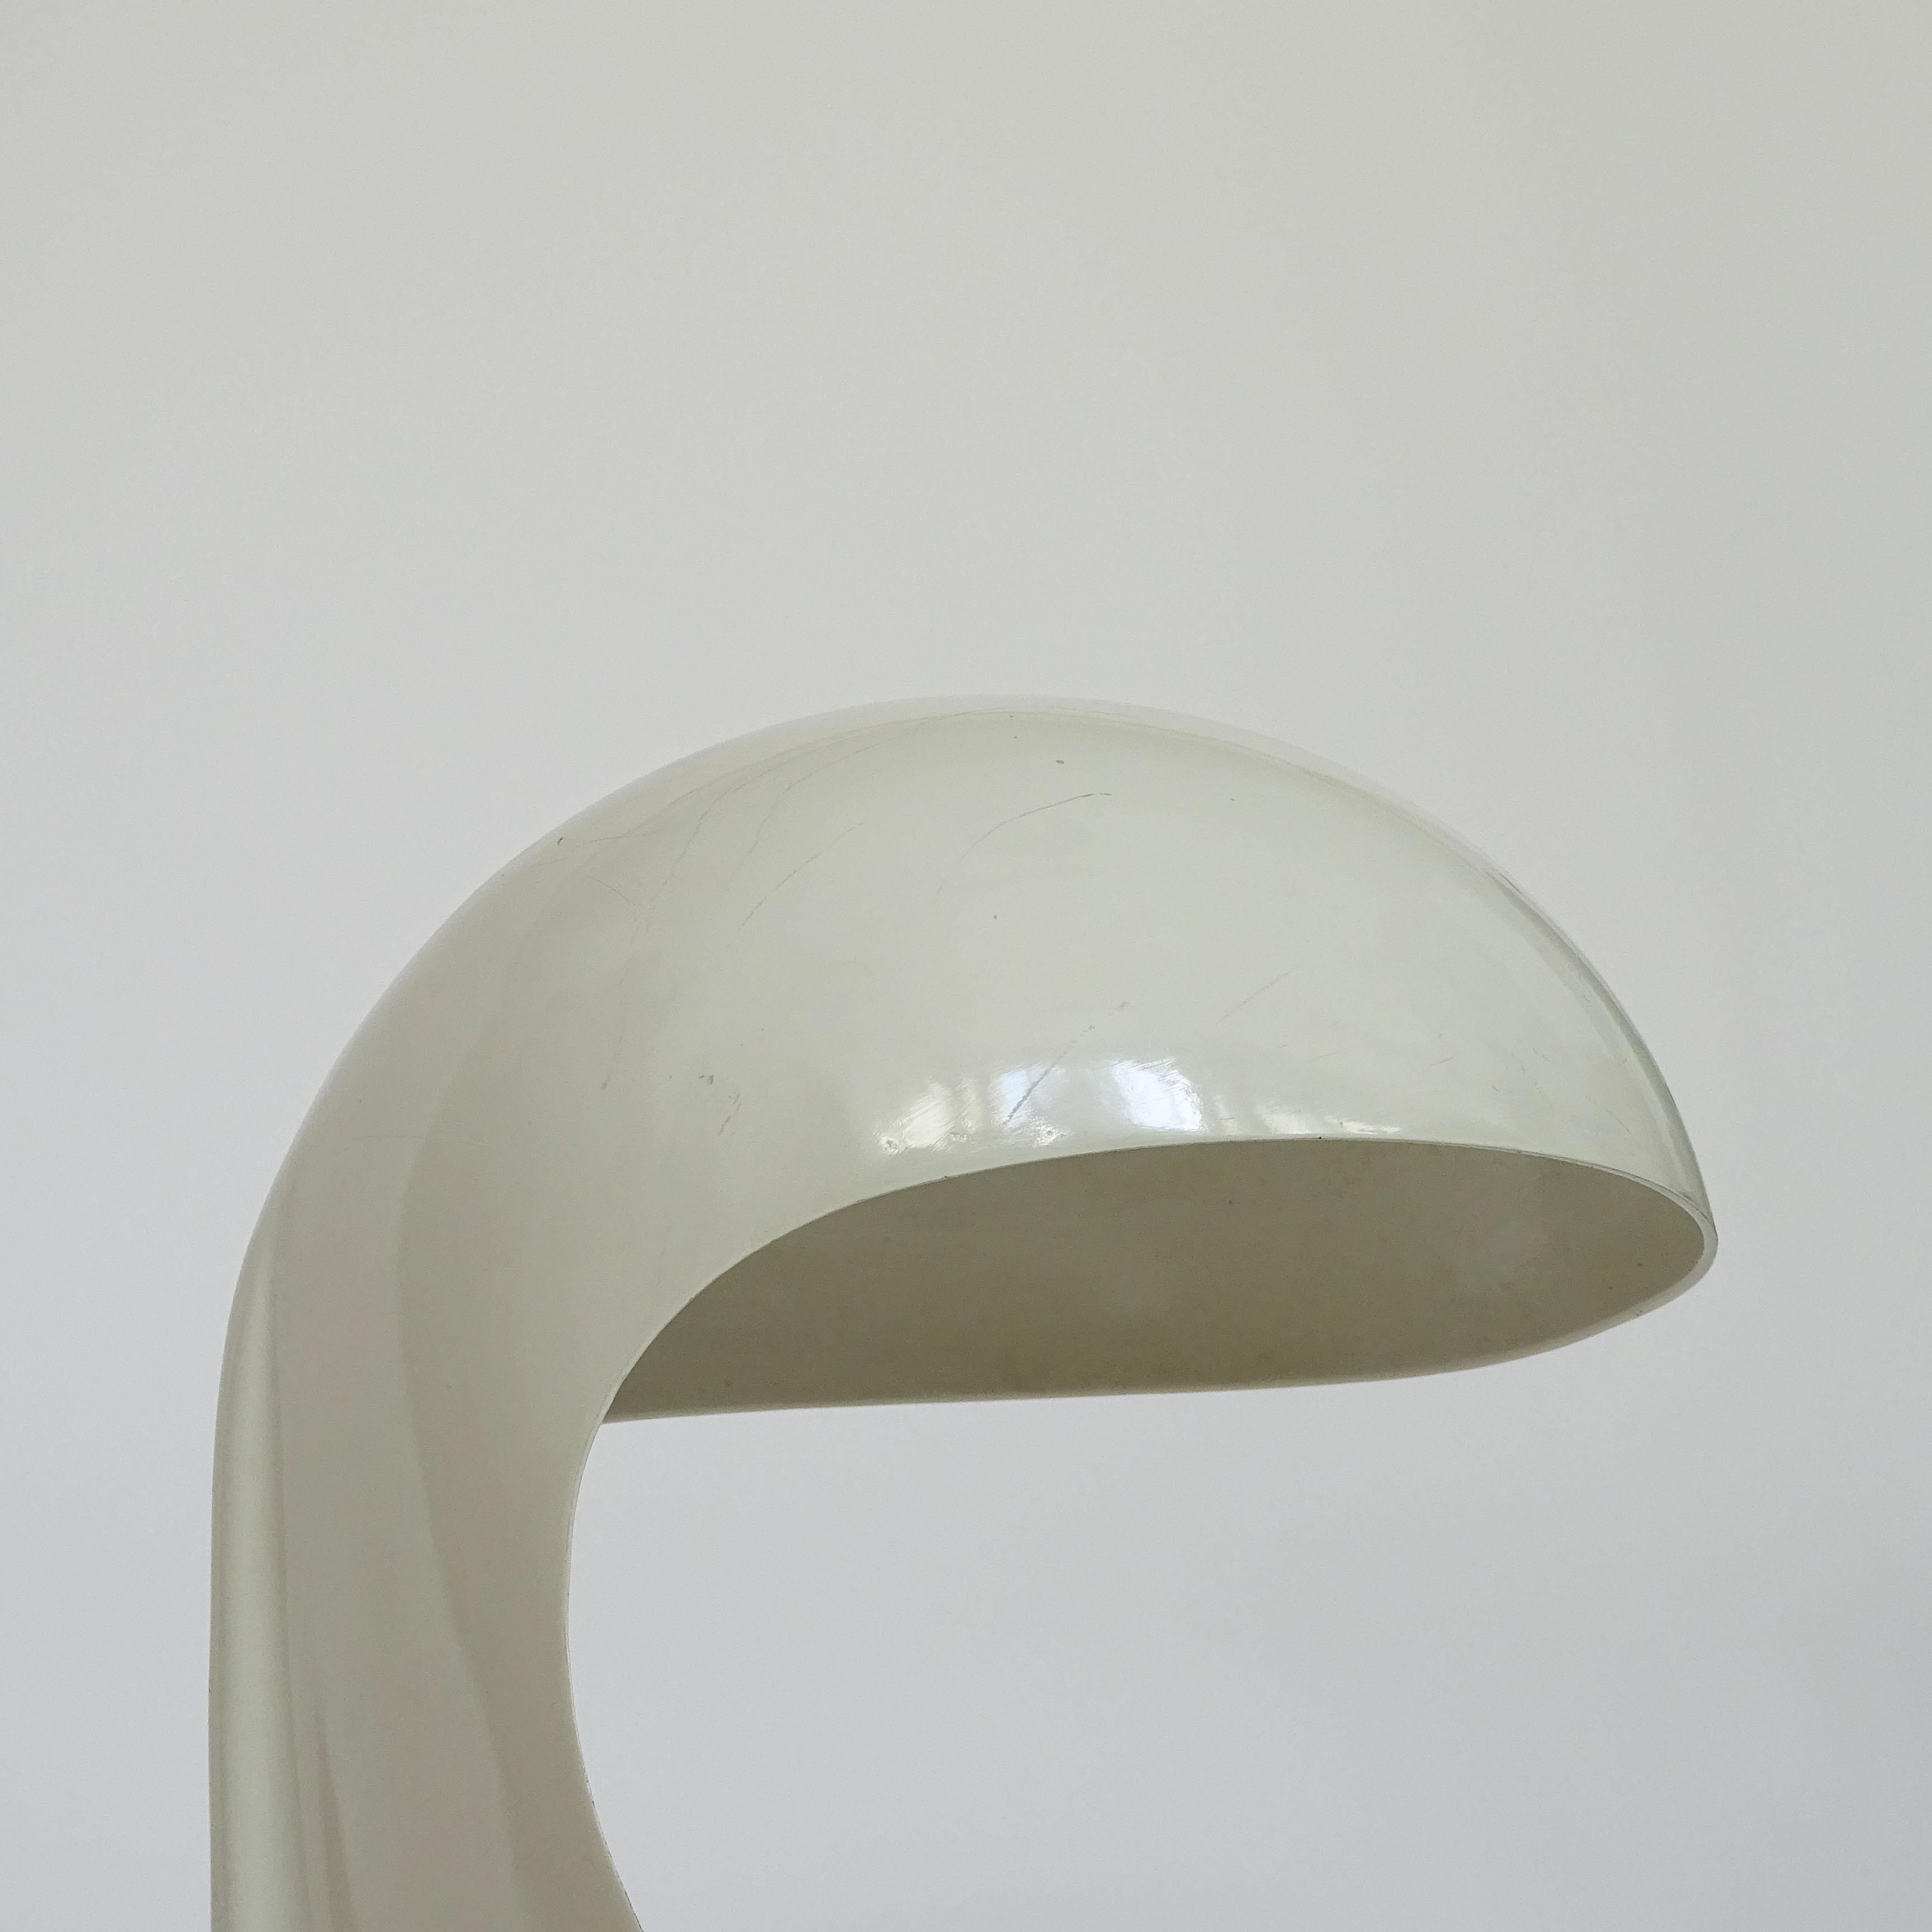 Dania Table Lamp by Dario Tognon for Artemide, Italy 1969
Iconic Italian Space Age lamp.